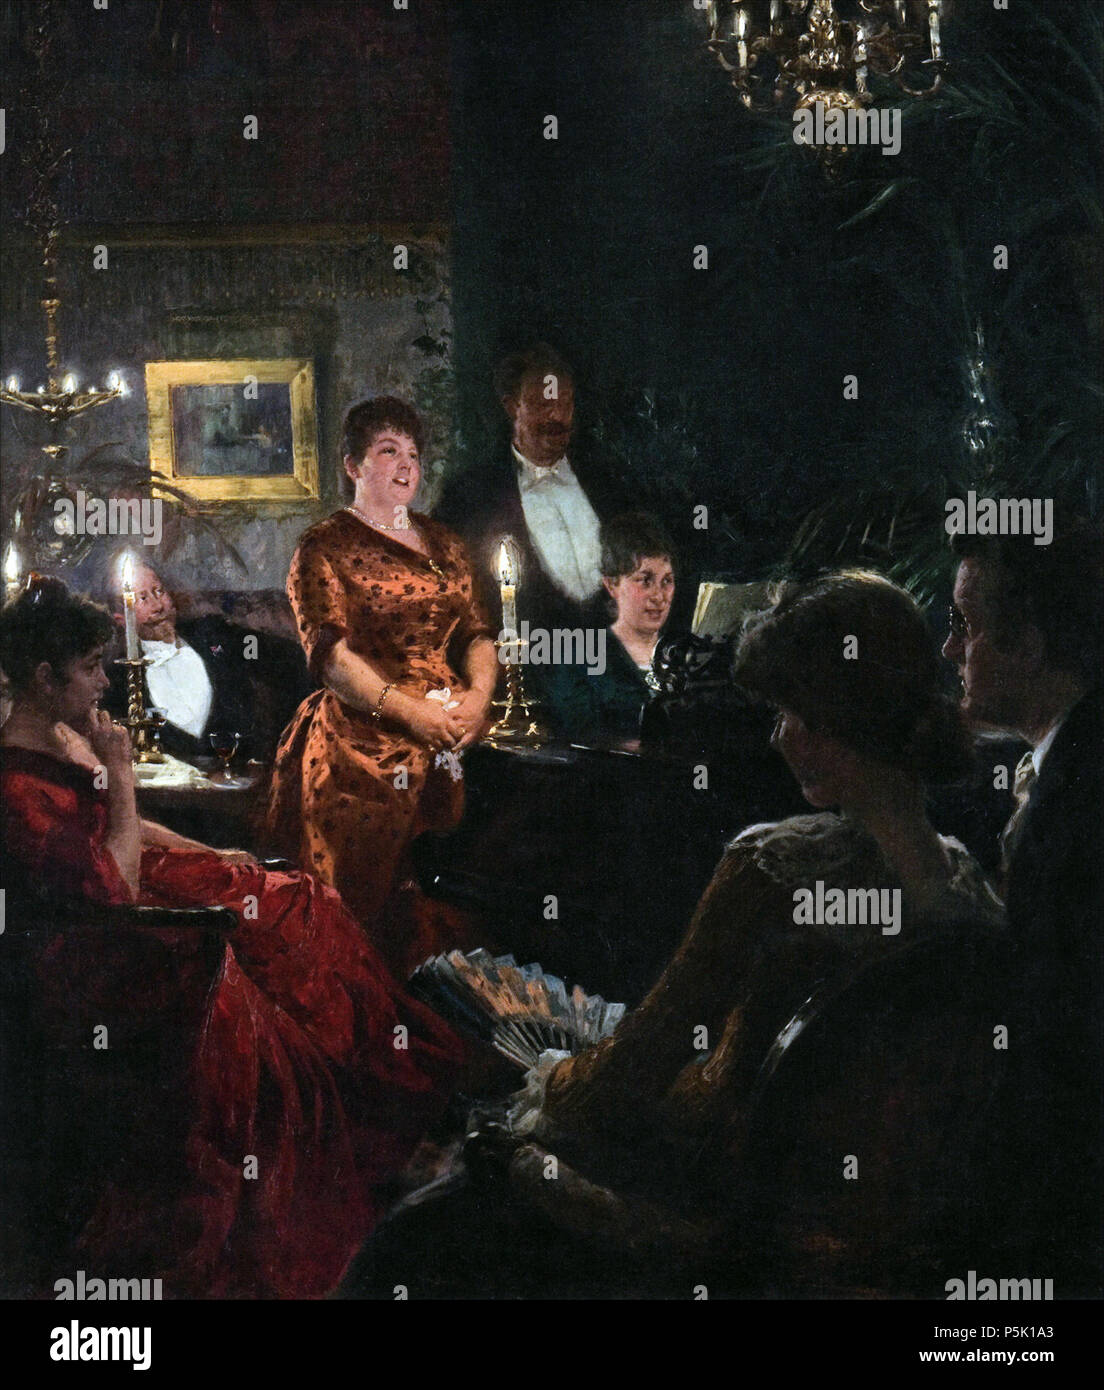 A duet . Miss Beatrice Dietrichsen and the painter Vilhelm Rosenstand in a duet, accompanied by Mrs Vilhelmine Bramsen at the piano. Seen at the front - with her back to the viewer - is Miss Marie Triepcke. Krøyer wanted her to sit for him, and this is his first painting of her. (Source: Peter Michael Hornung (2005): Peder Severin Krøyer, page 229.) . 1887. N/A 31 En duet. (1887 painting) Stock Photo